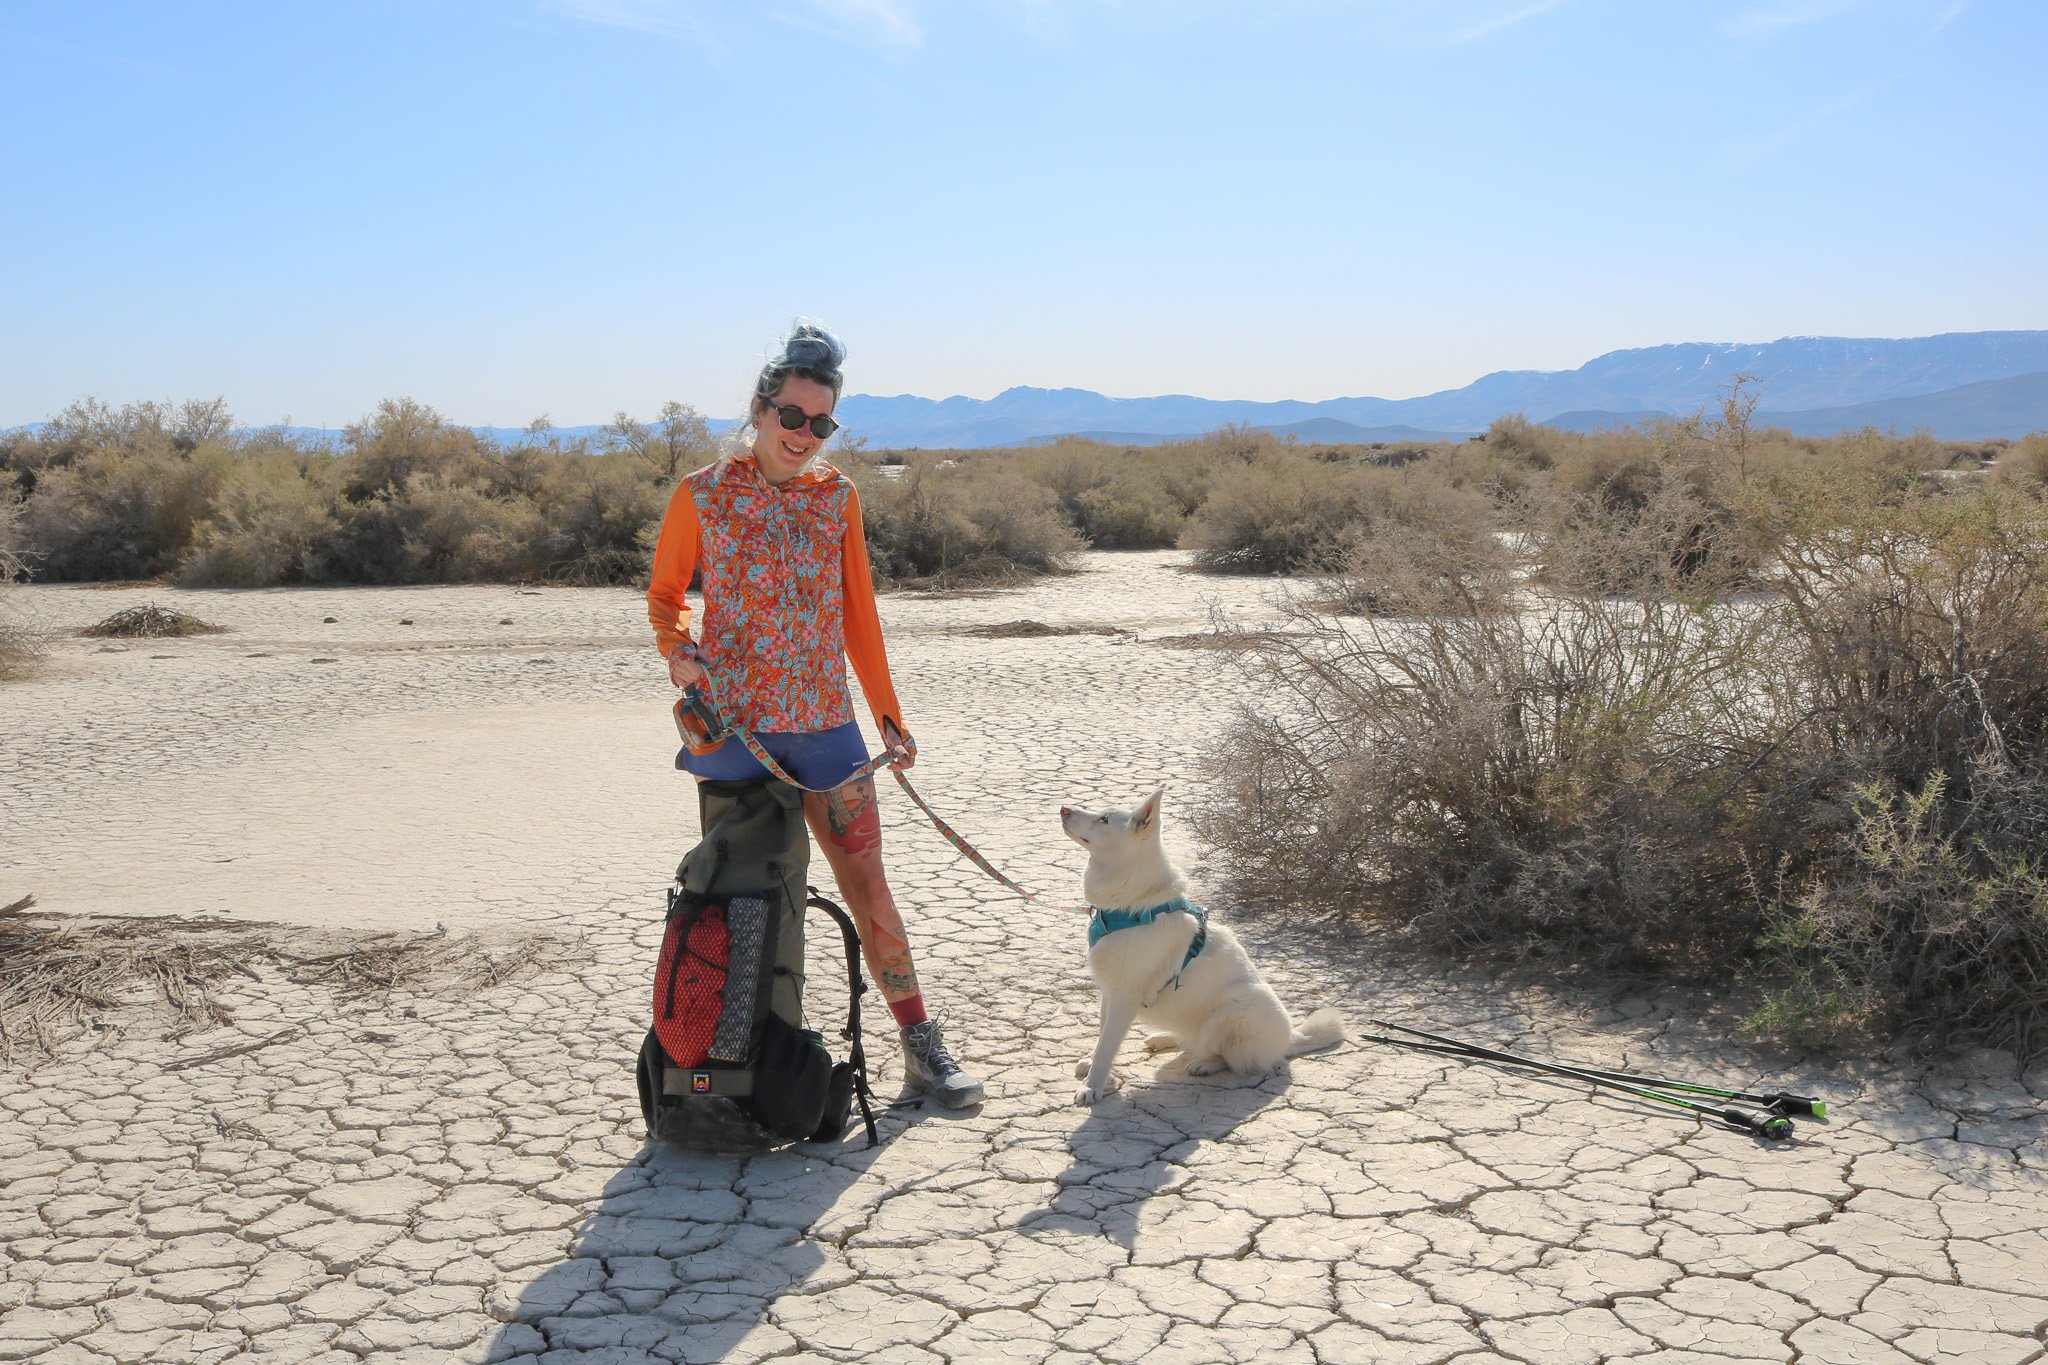 A hiker and her dog in the Alvord Desert